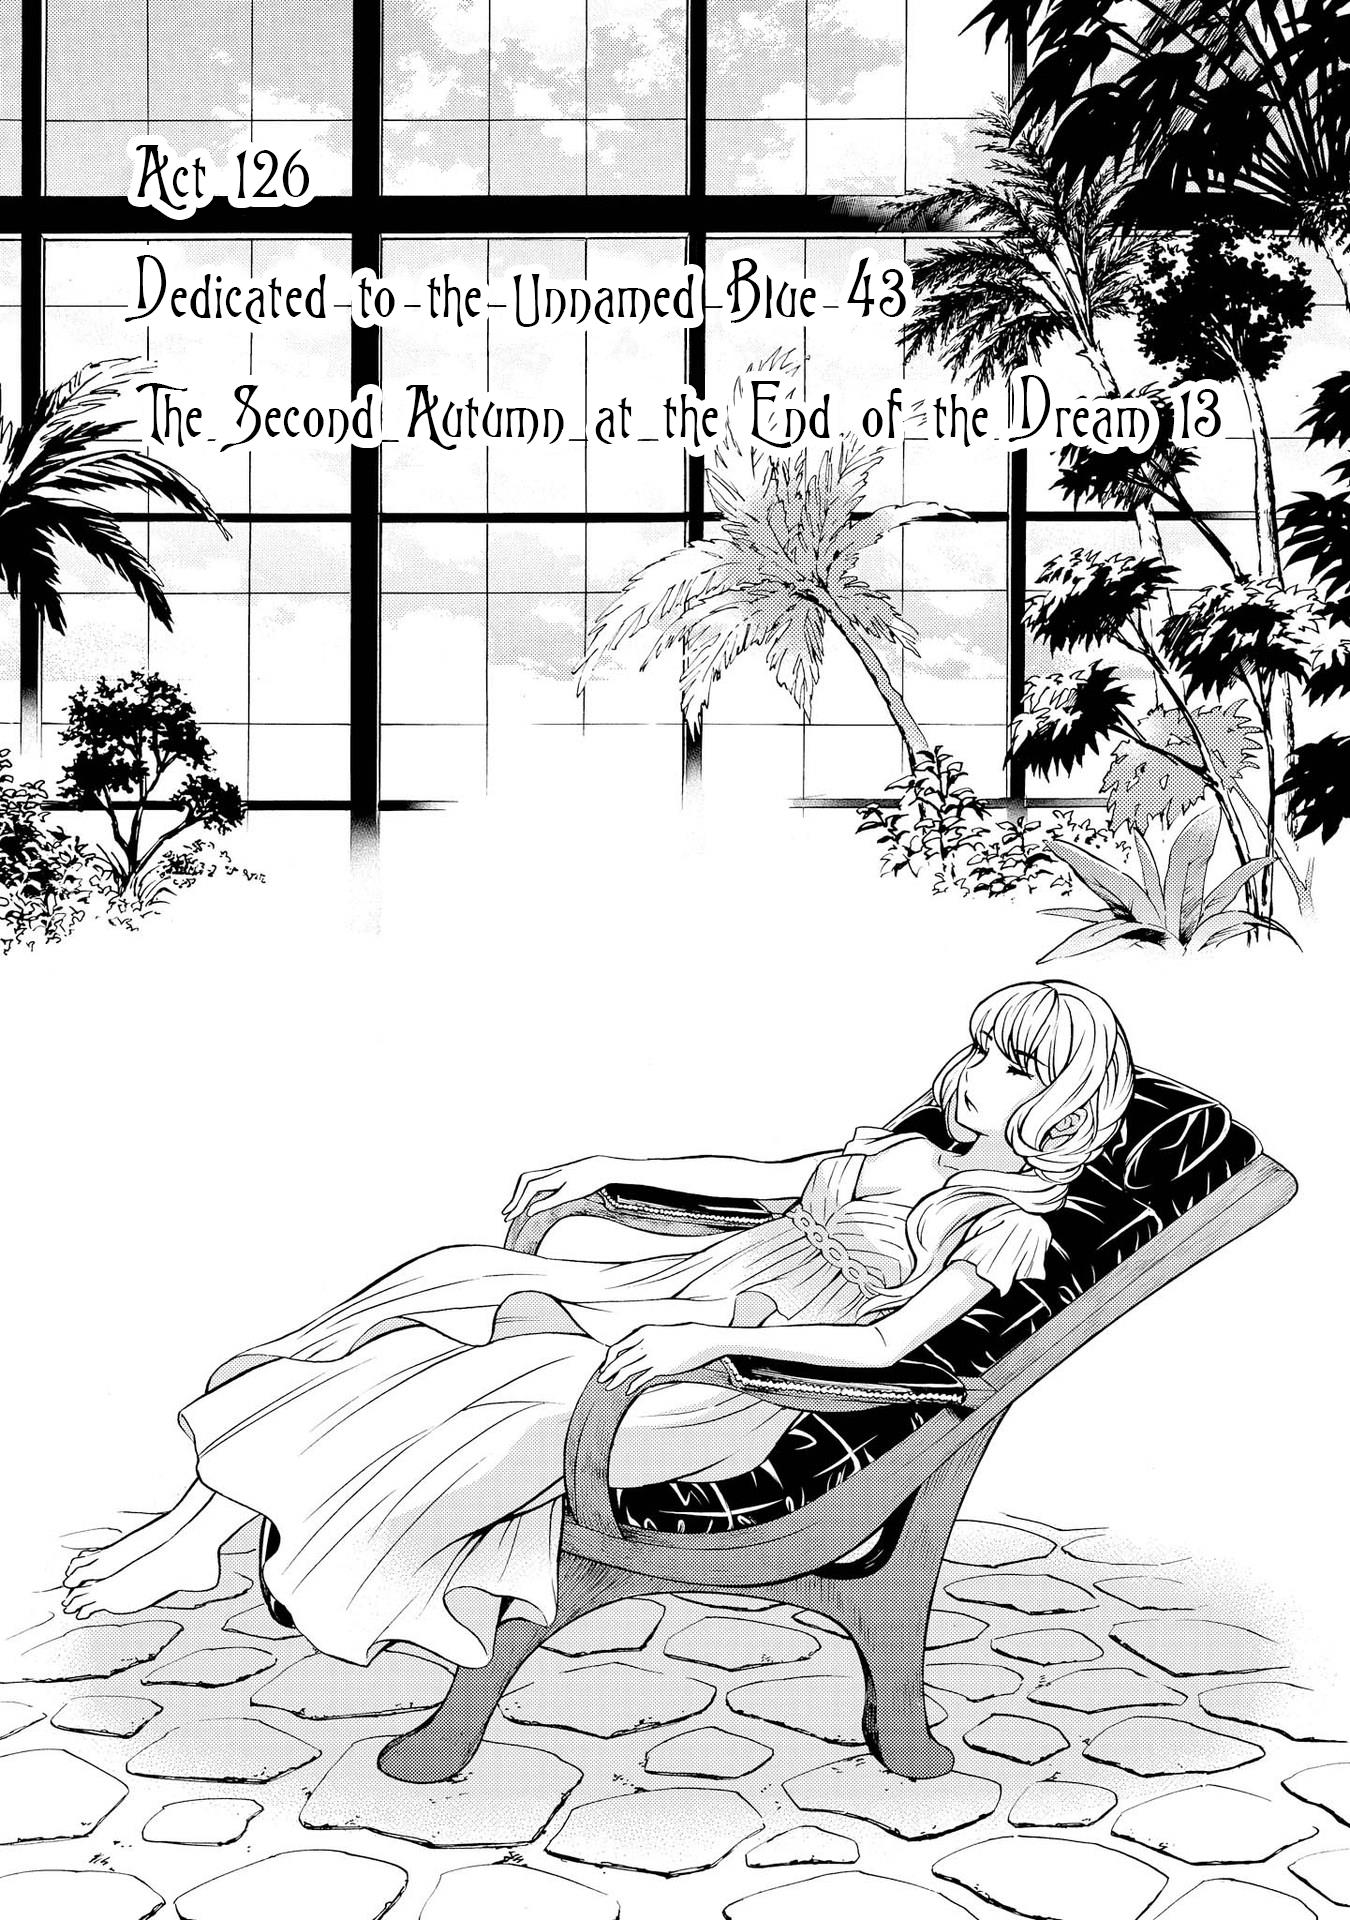 Hatenkou Yuugi Vol.18 Chapter 126: Dedicated To The Unnamed Blue #43 - The Second Autumn At The End Of The Dream #13 - Picture 1